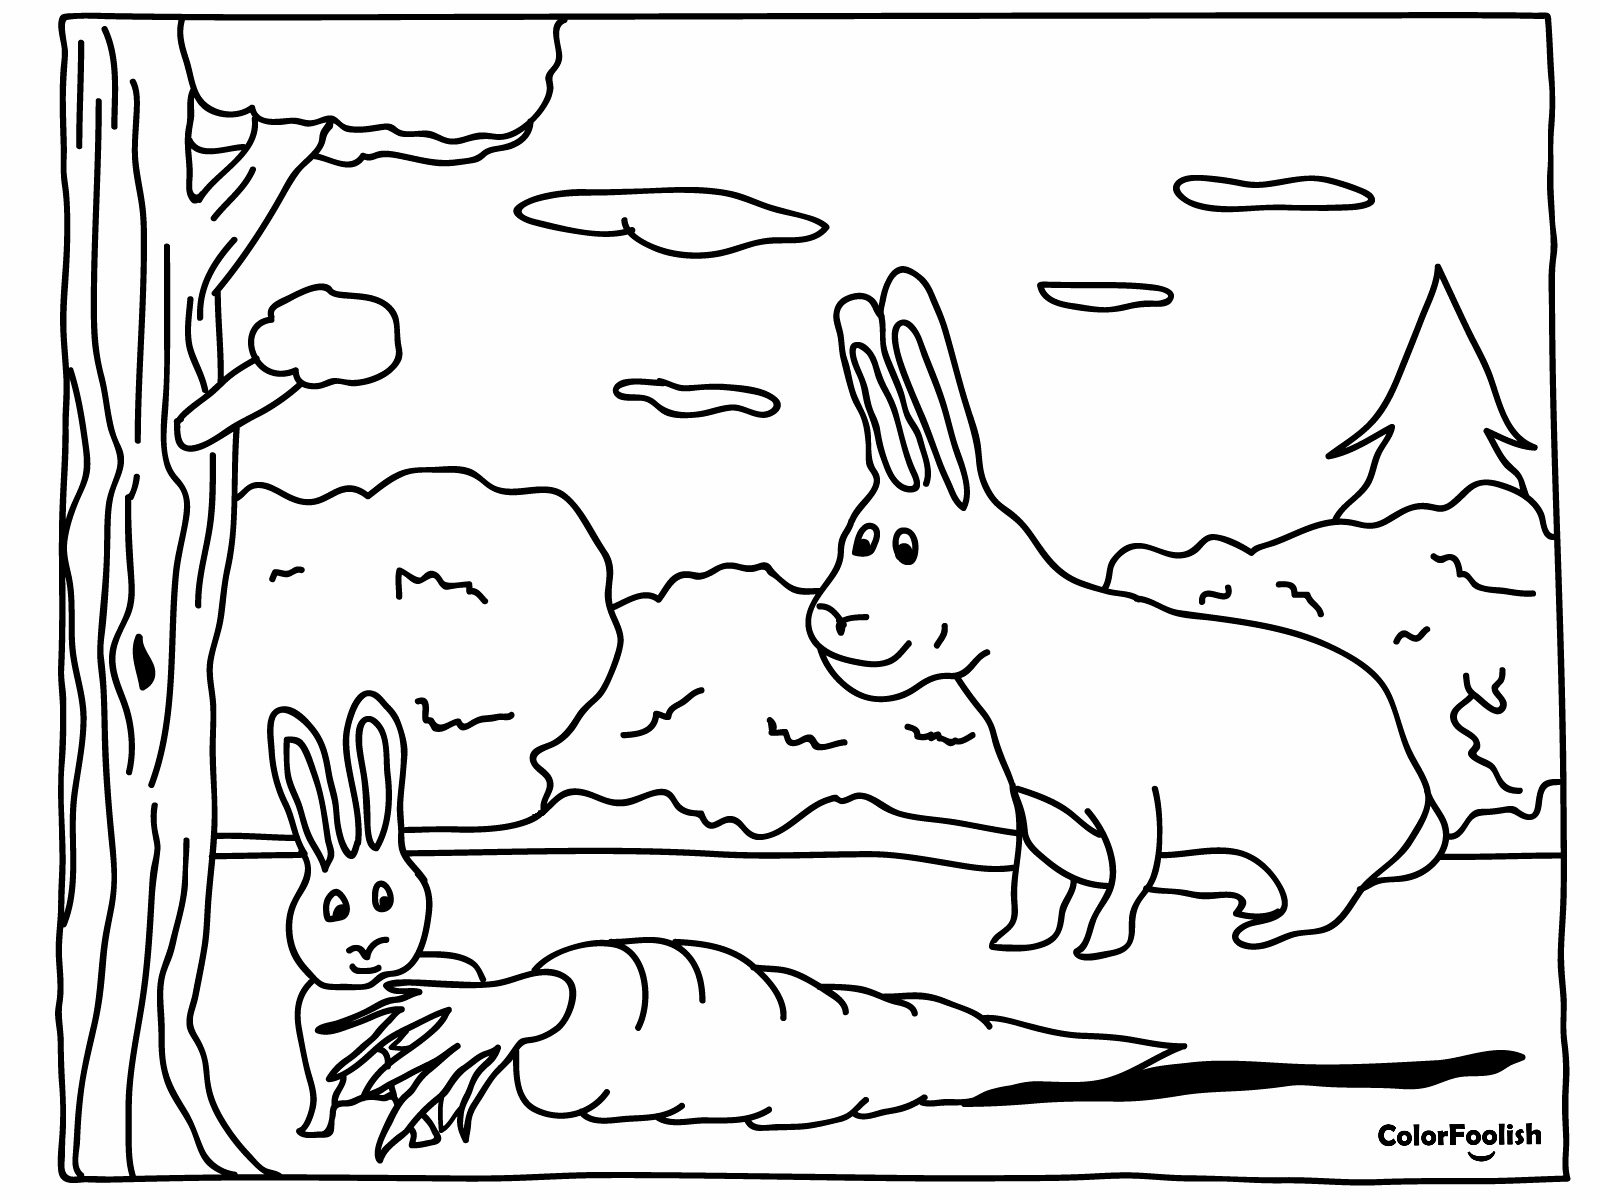 Coloring page of baby rabbit with a very large carrot